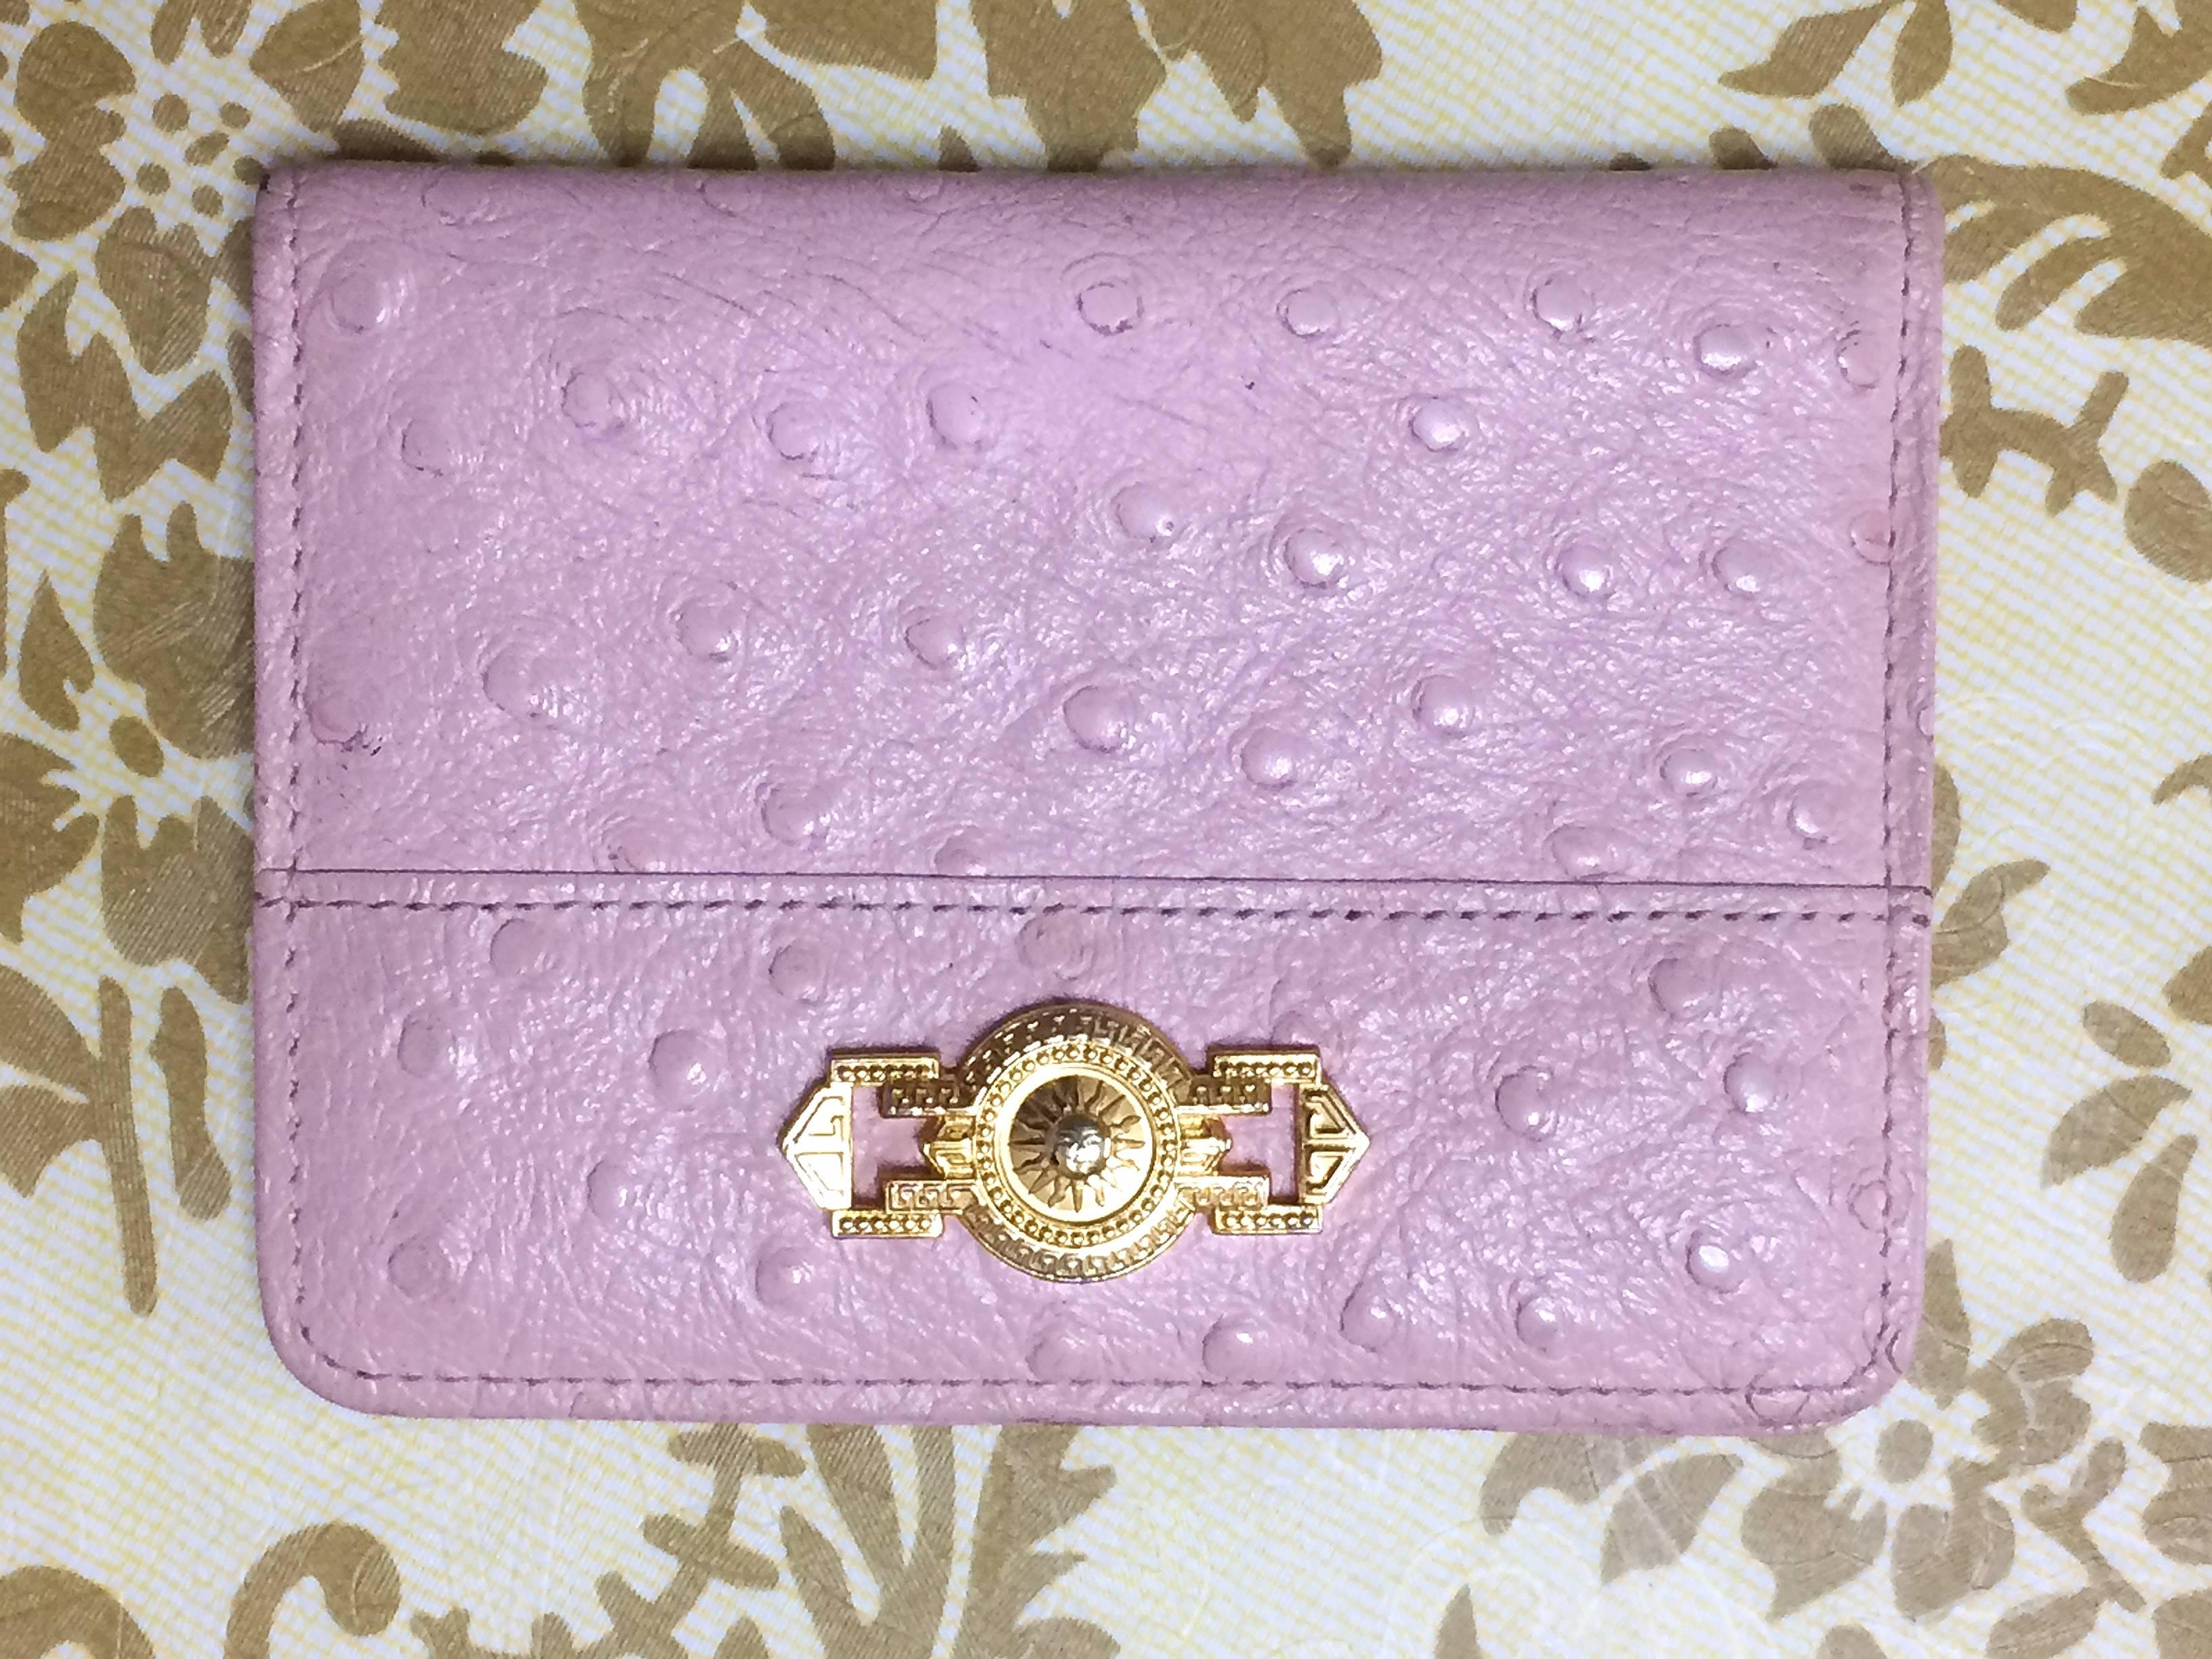 Vintage Gianni Versace ostrich-embossed pink leather card, id case, card case 2